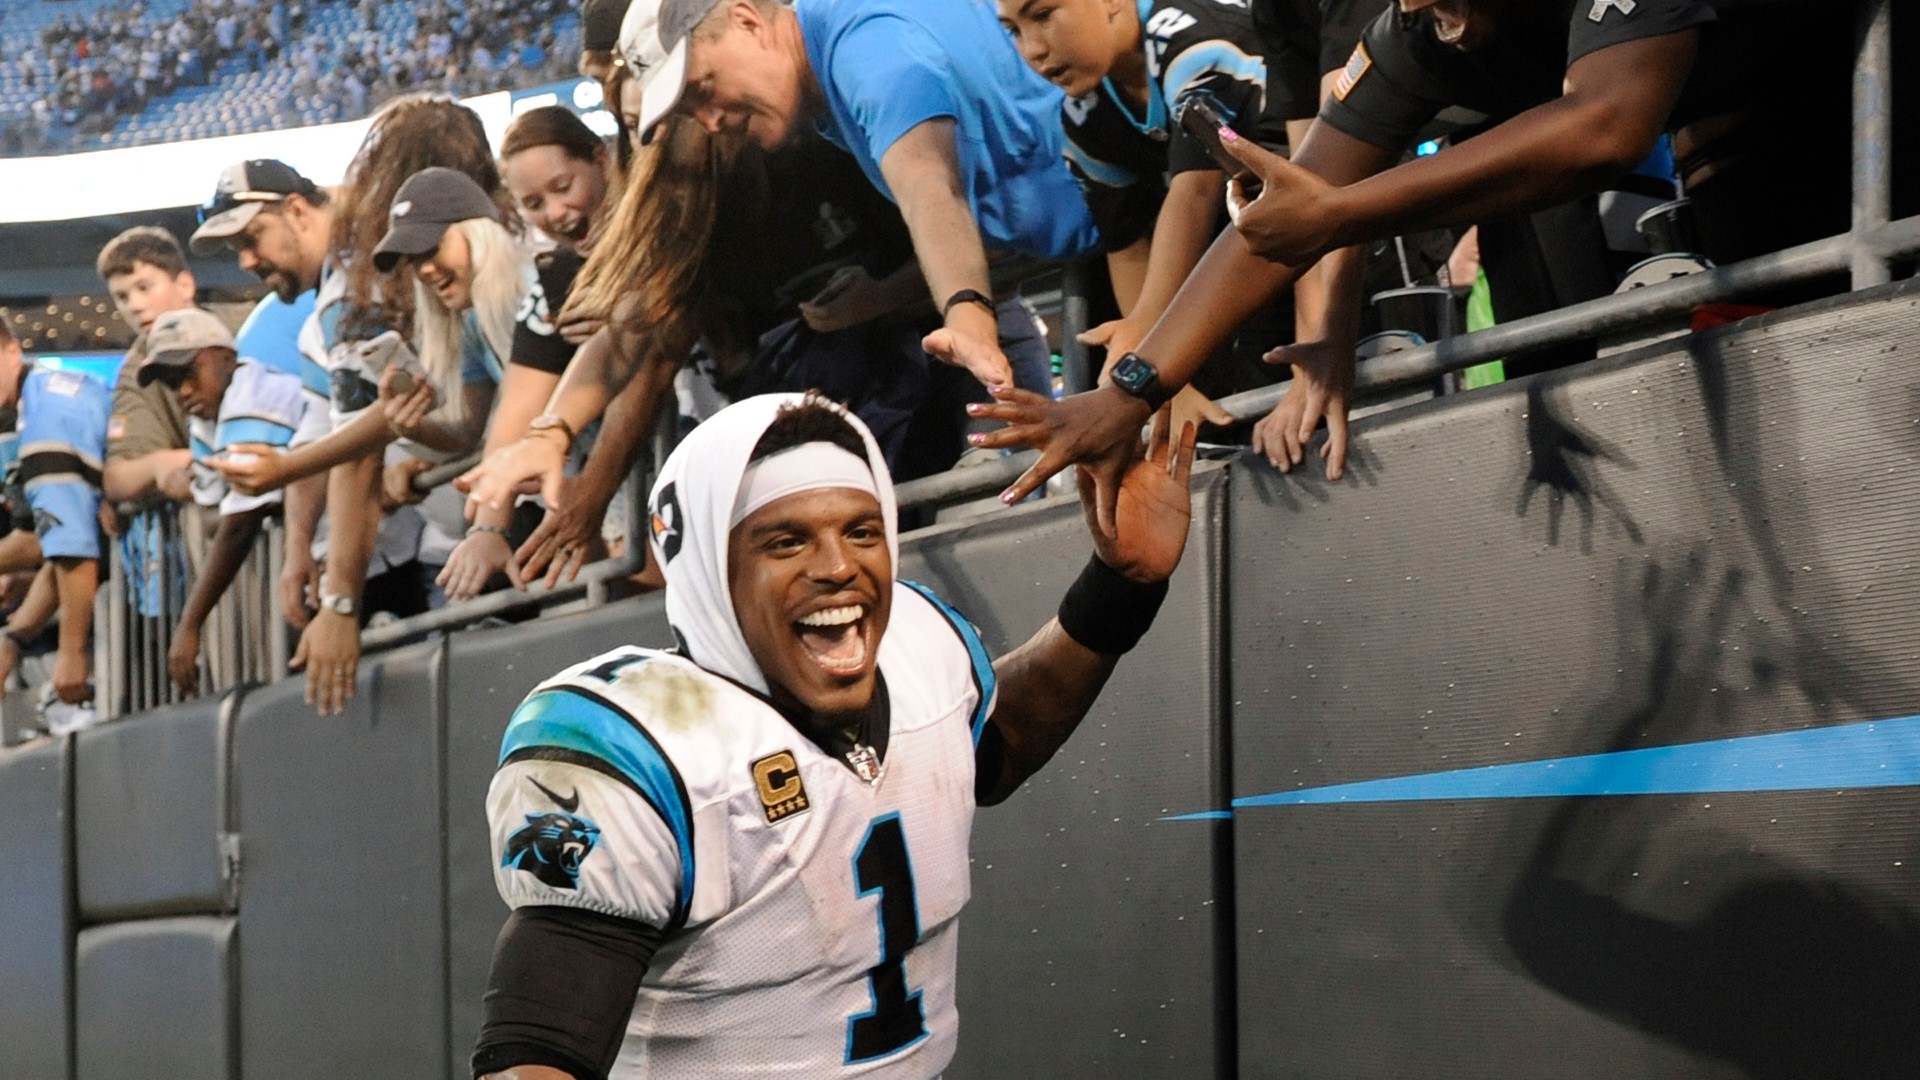 The news about Cam Newton coming back to the Carolina Panthers is making waves through bars and restaurants near the Bank of America Stadium.